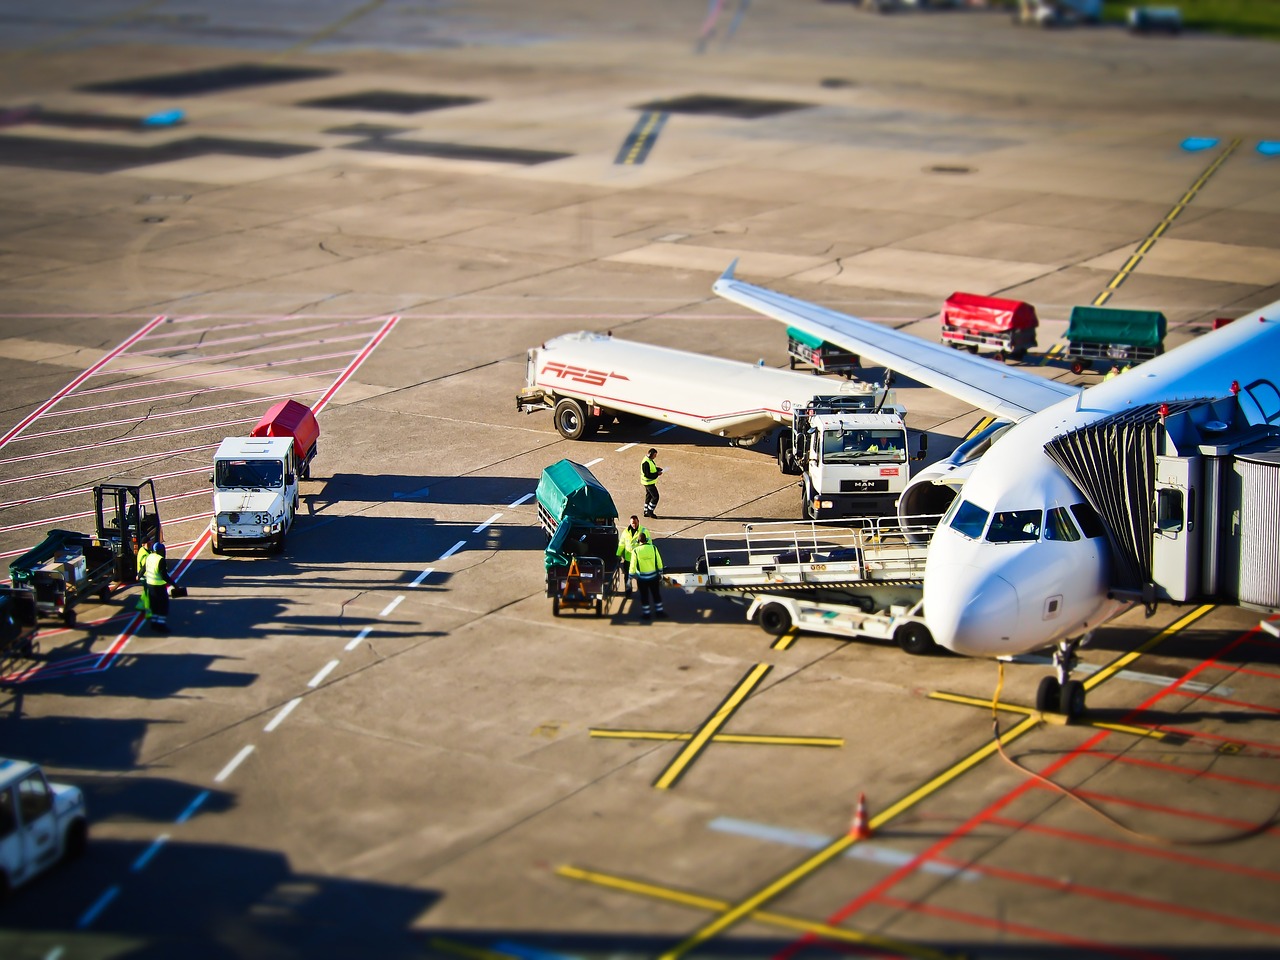 Air cargo services are recovering from the effects of Covid-19: IATA